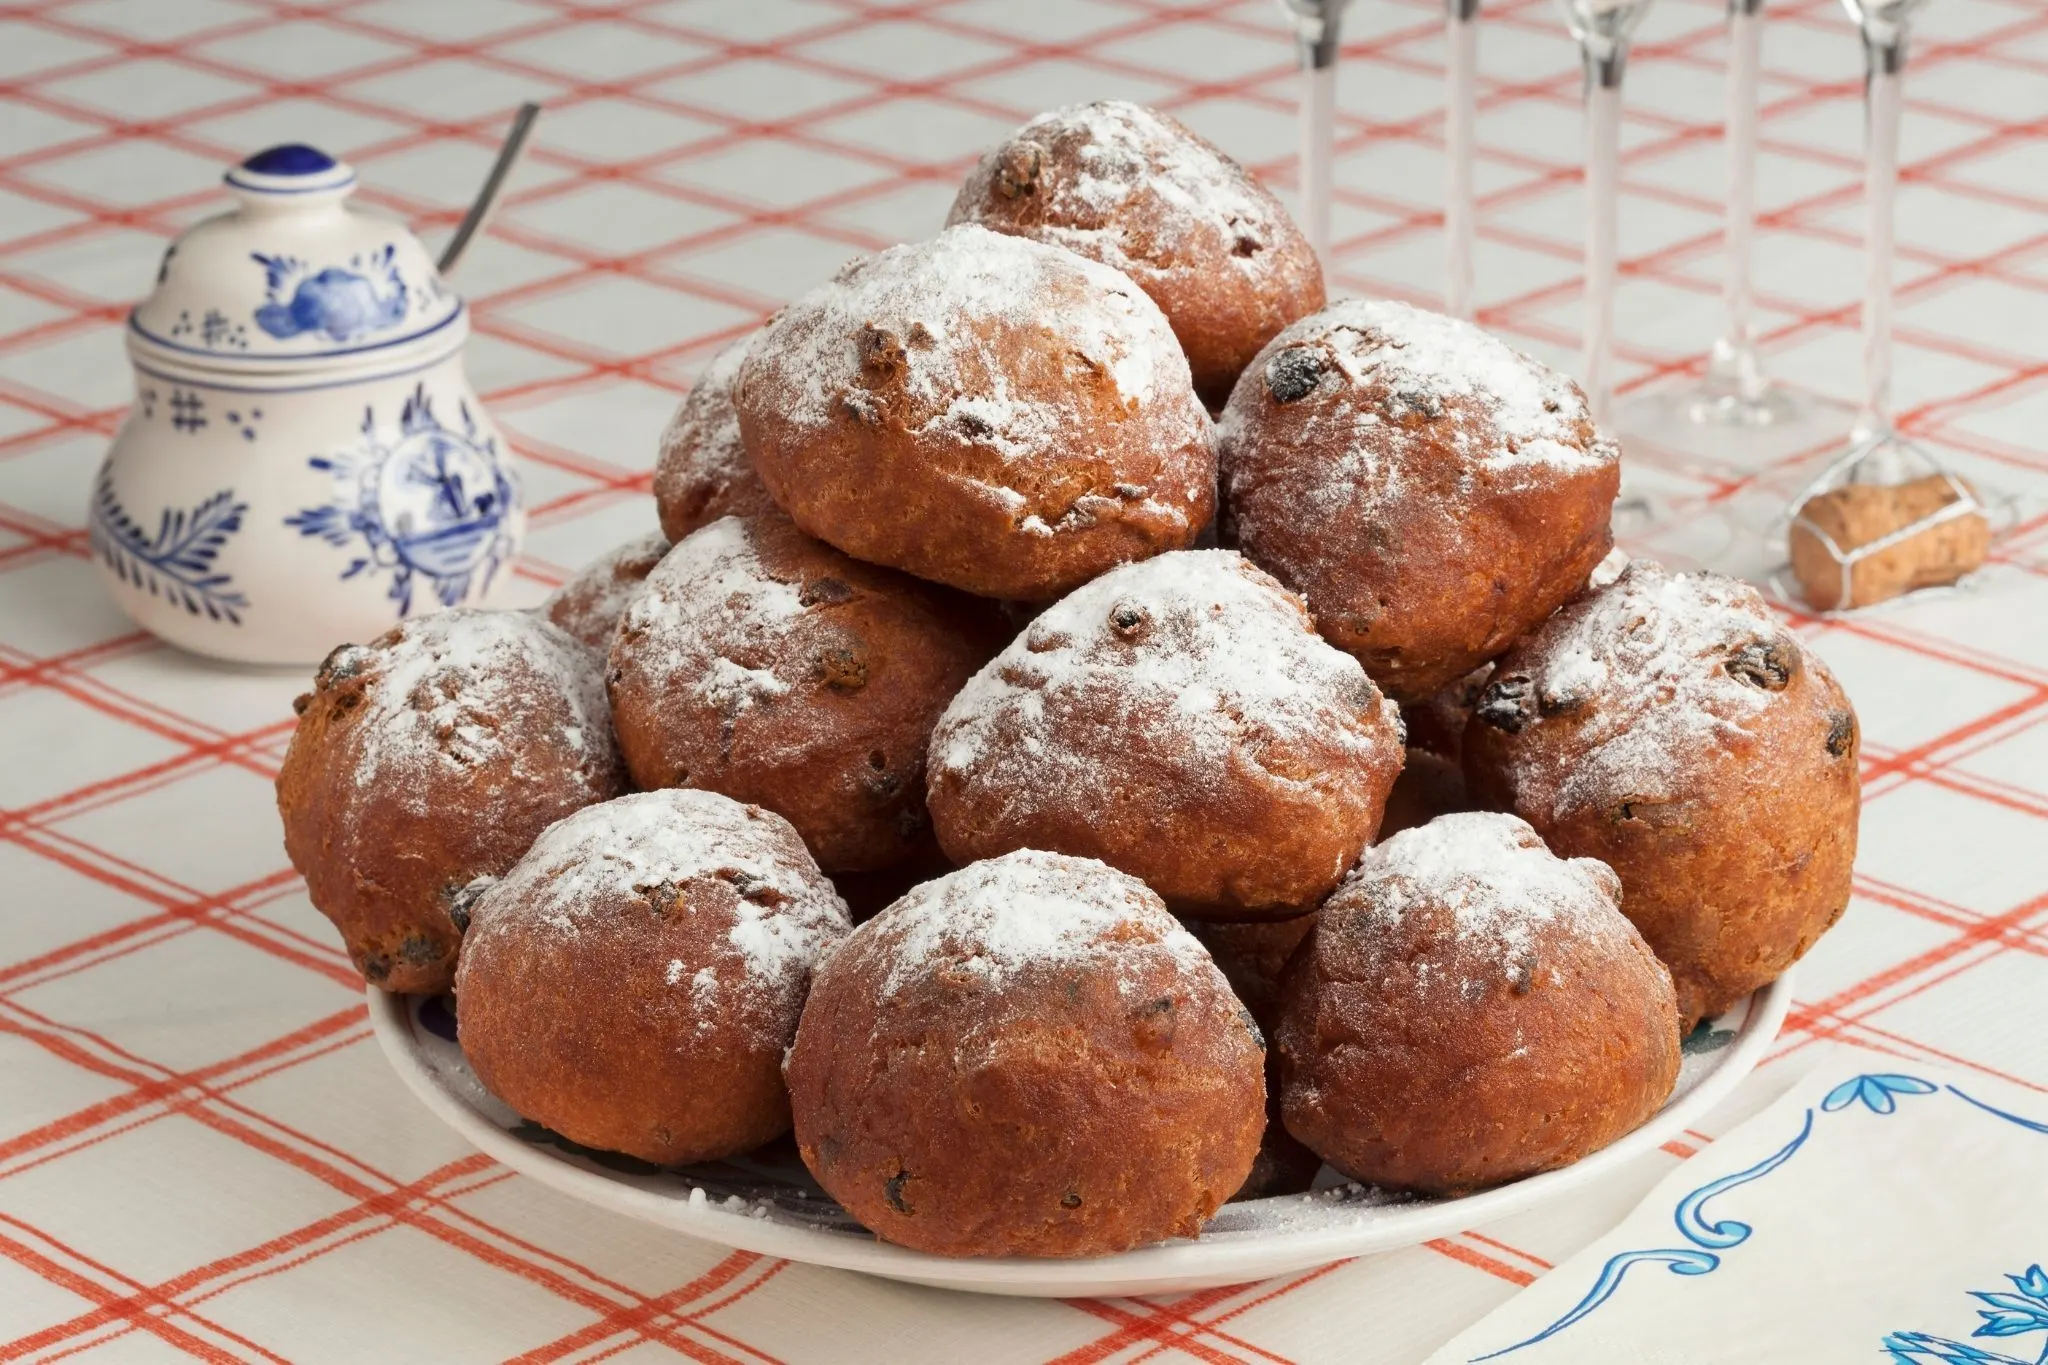 Fried dough balls topped with powdered sugar